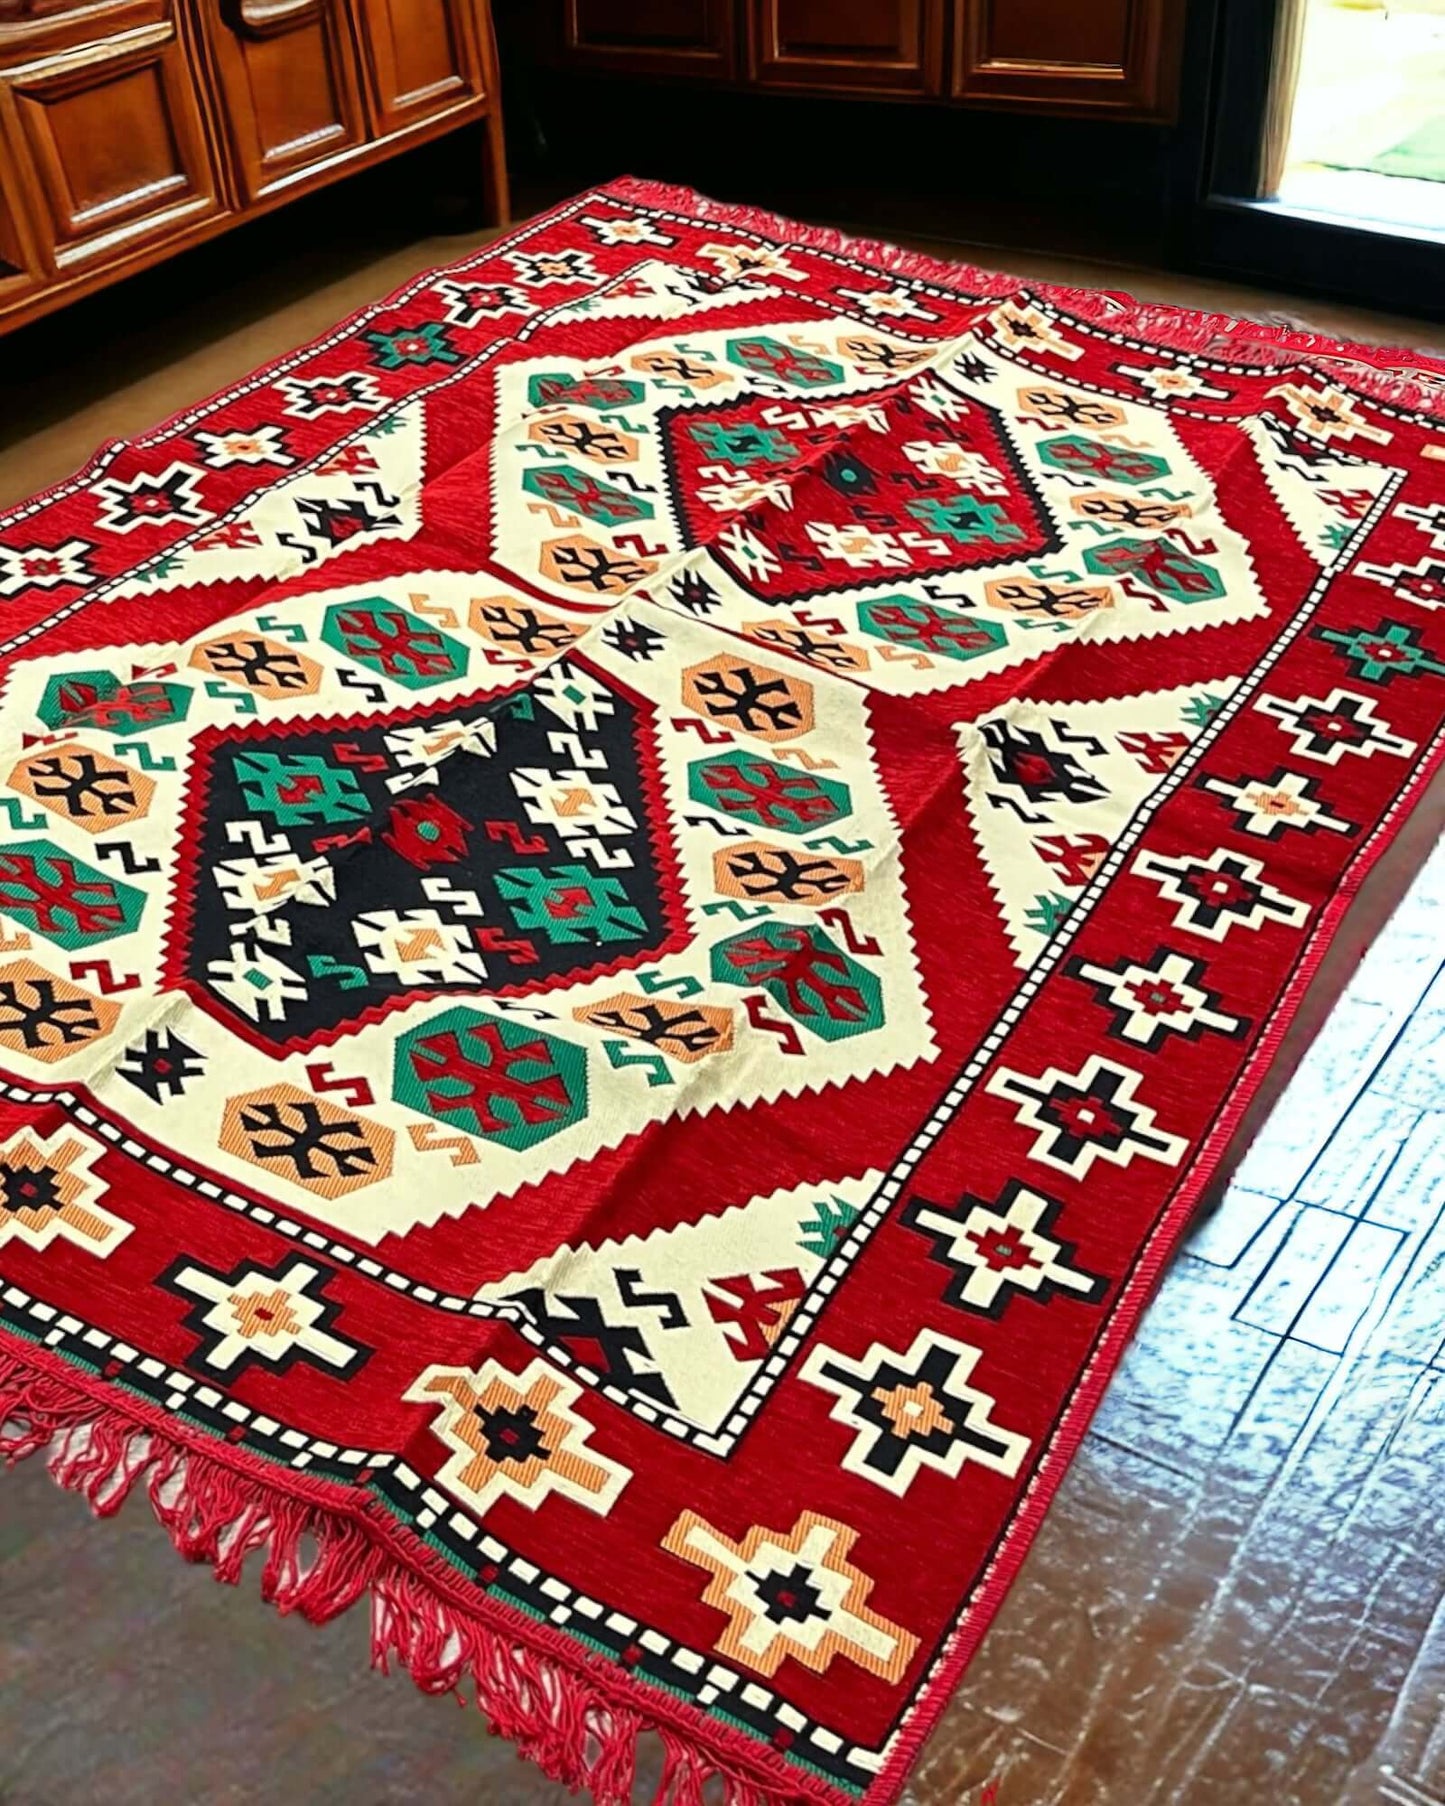 Turkish Kilim Rugs- Perfect match for your divan set and floor cushions. Crafted from 100% cotton in Turkey, this rug seamlessly complements your living space with its captivating geometric pattern and practical design. Matching rugs for Arabian Majlis